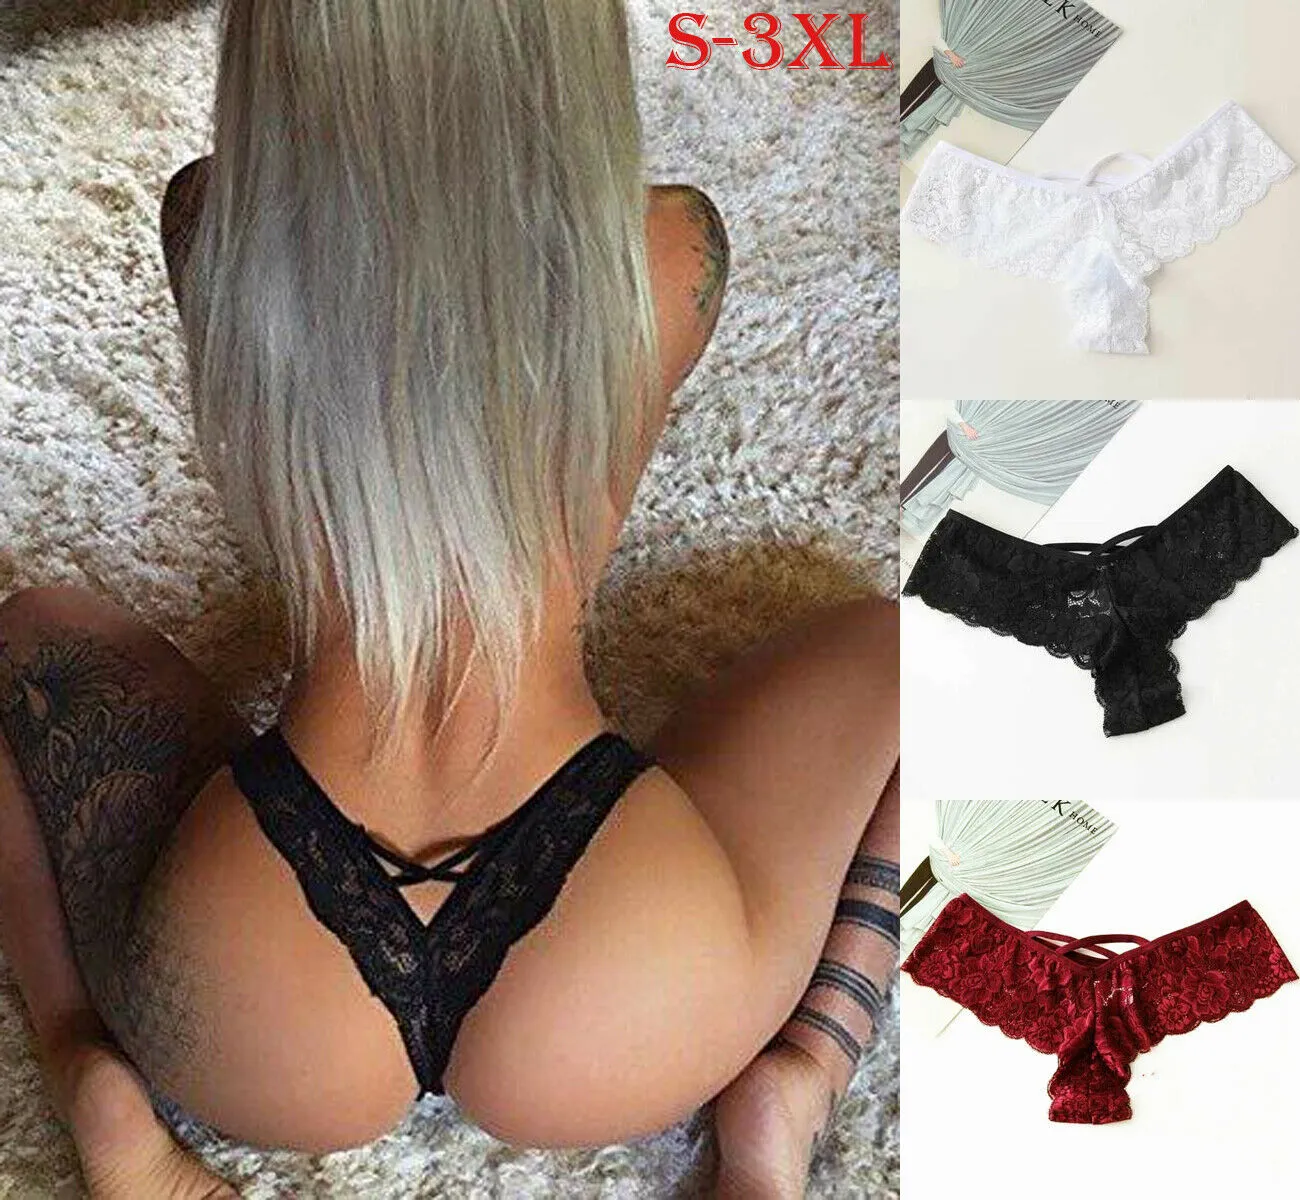 Sexy Thongs Underwear Women Seamless Lingerie Lace Panties Bikini Knickers  G String Underpant Briefs Tanga Female Thong S 3XL J0222483 From 26,06 €